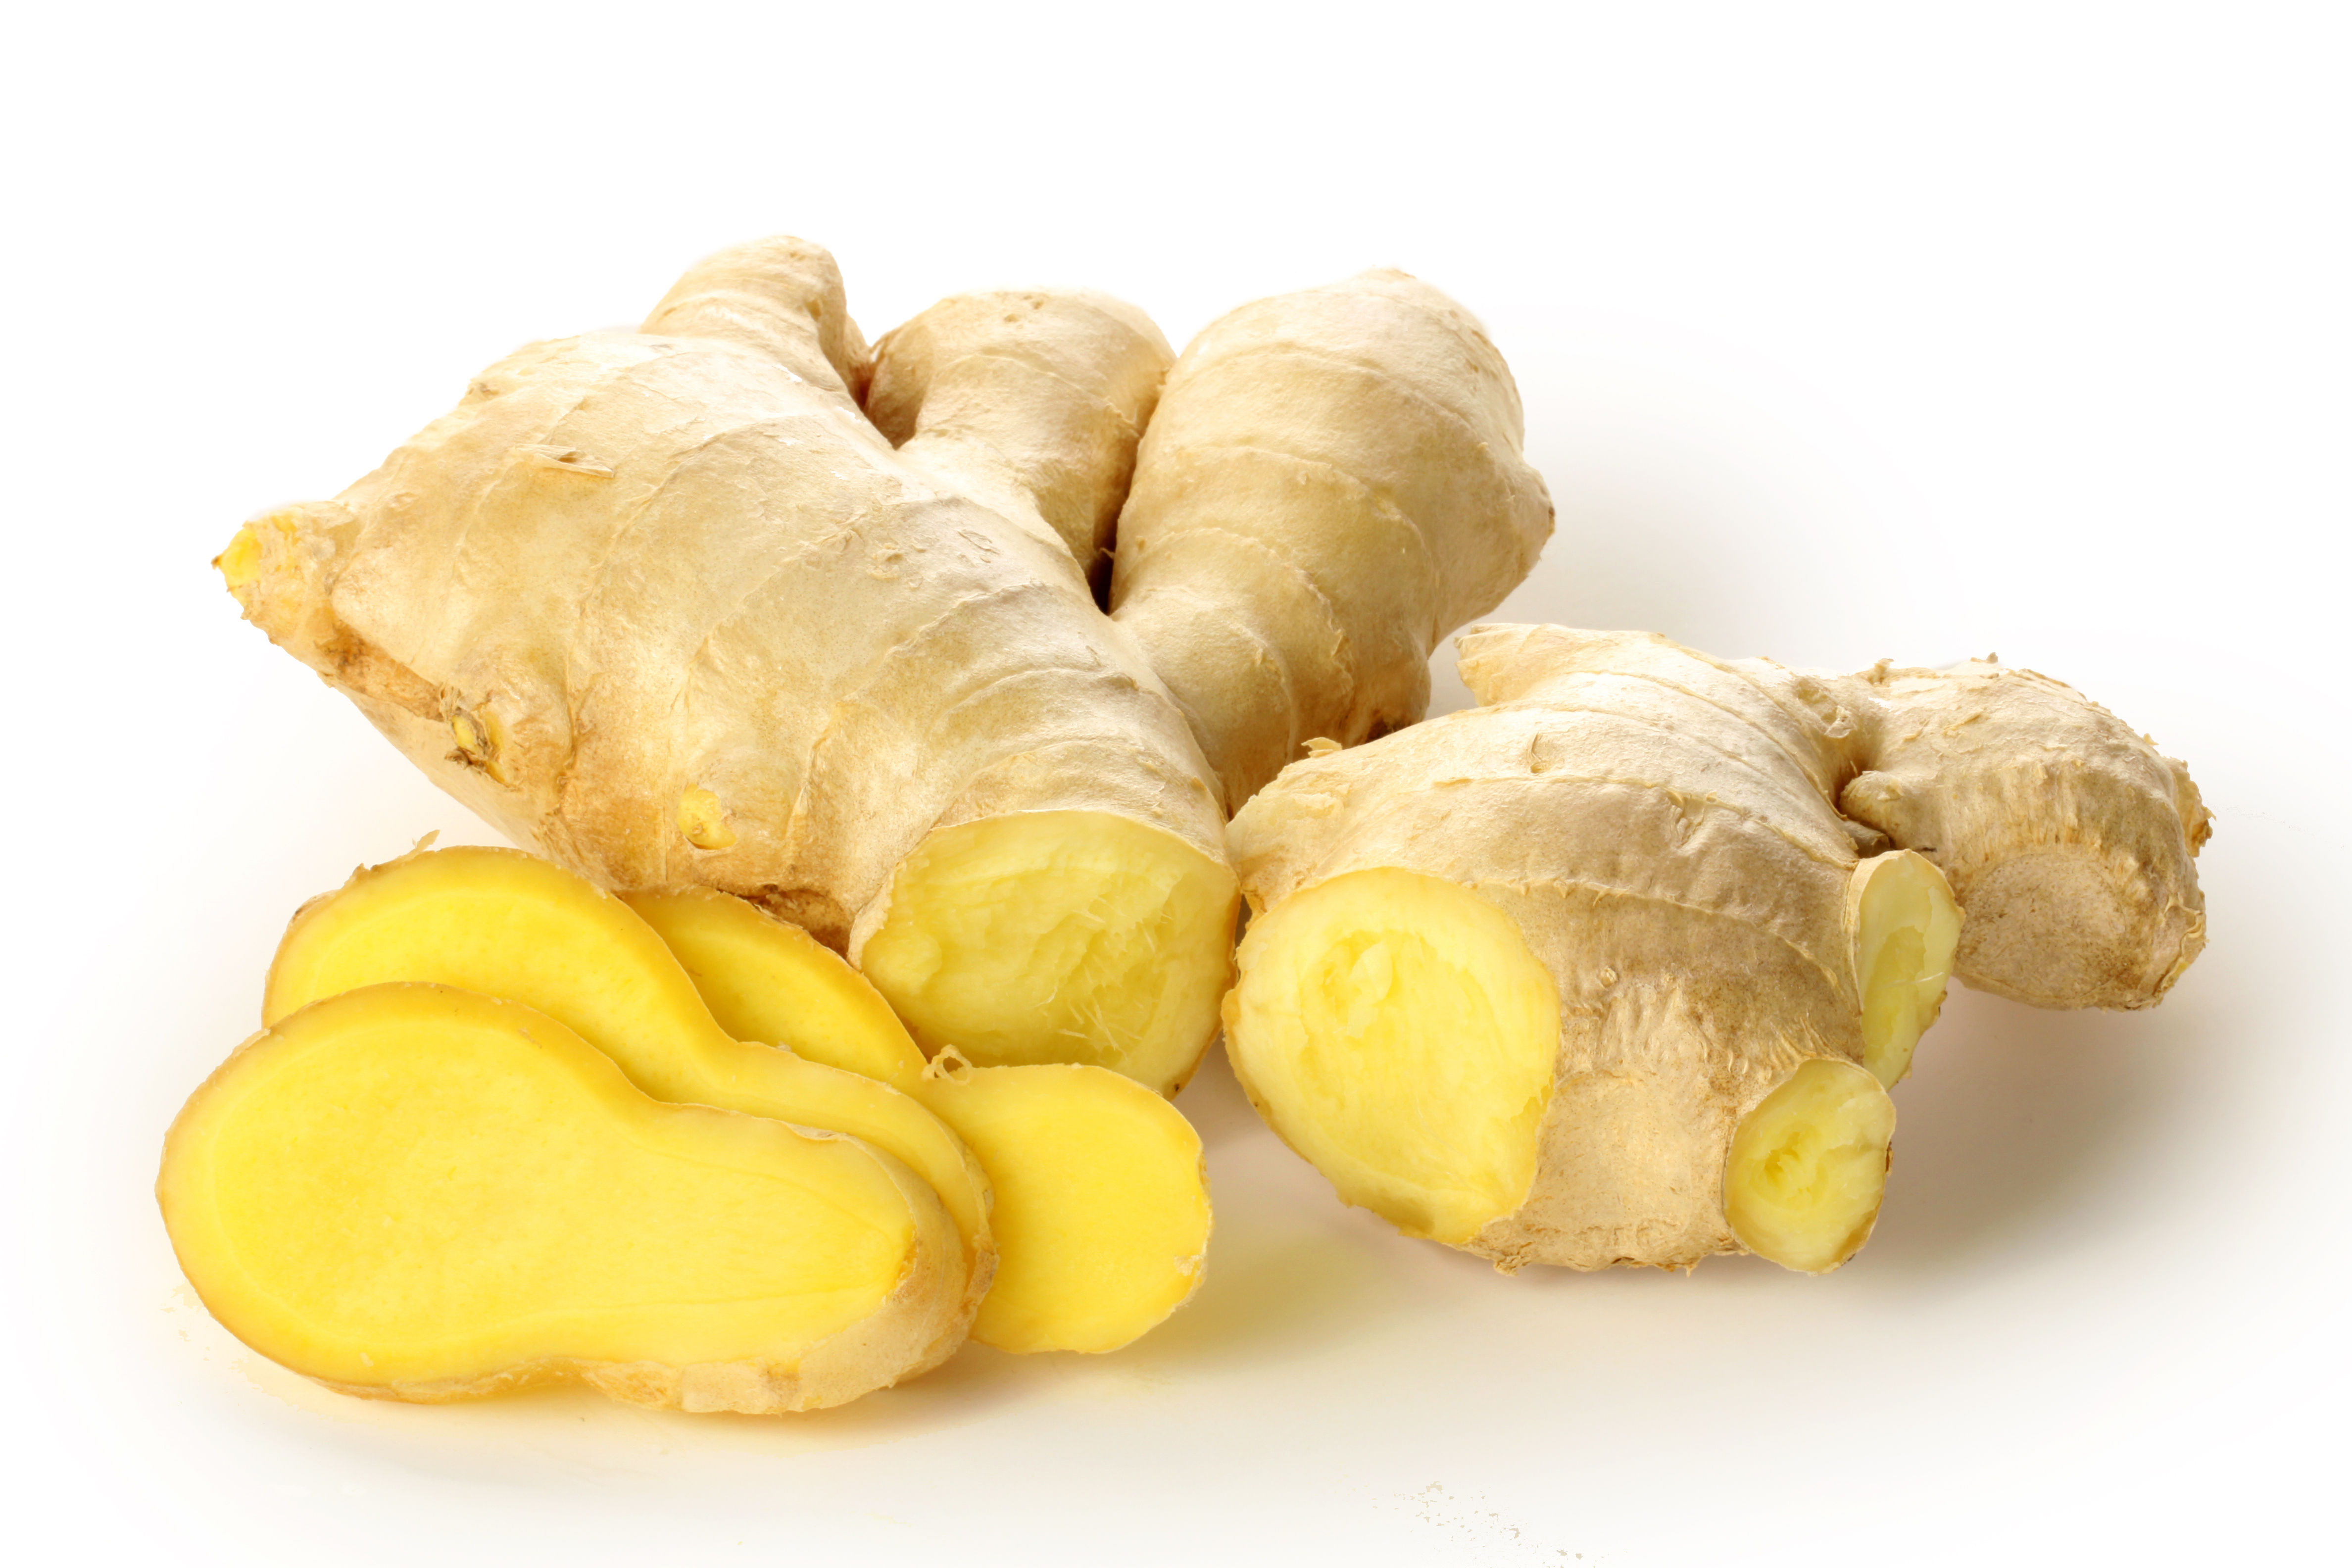 Ginger and its medicinal qualities